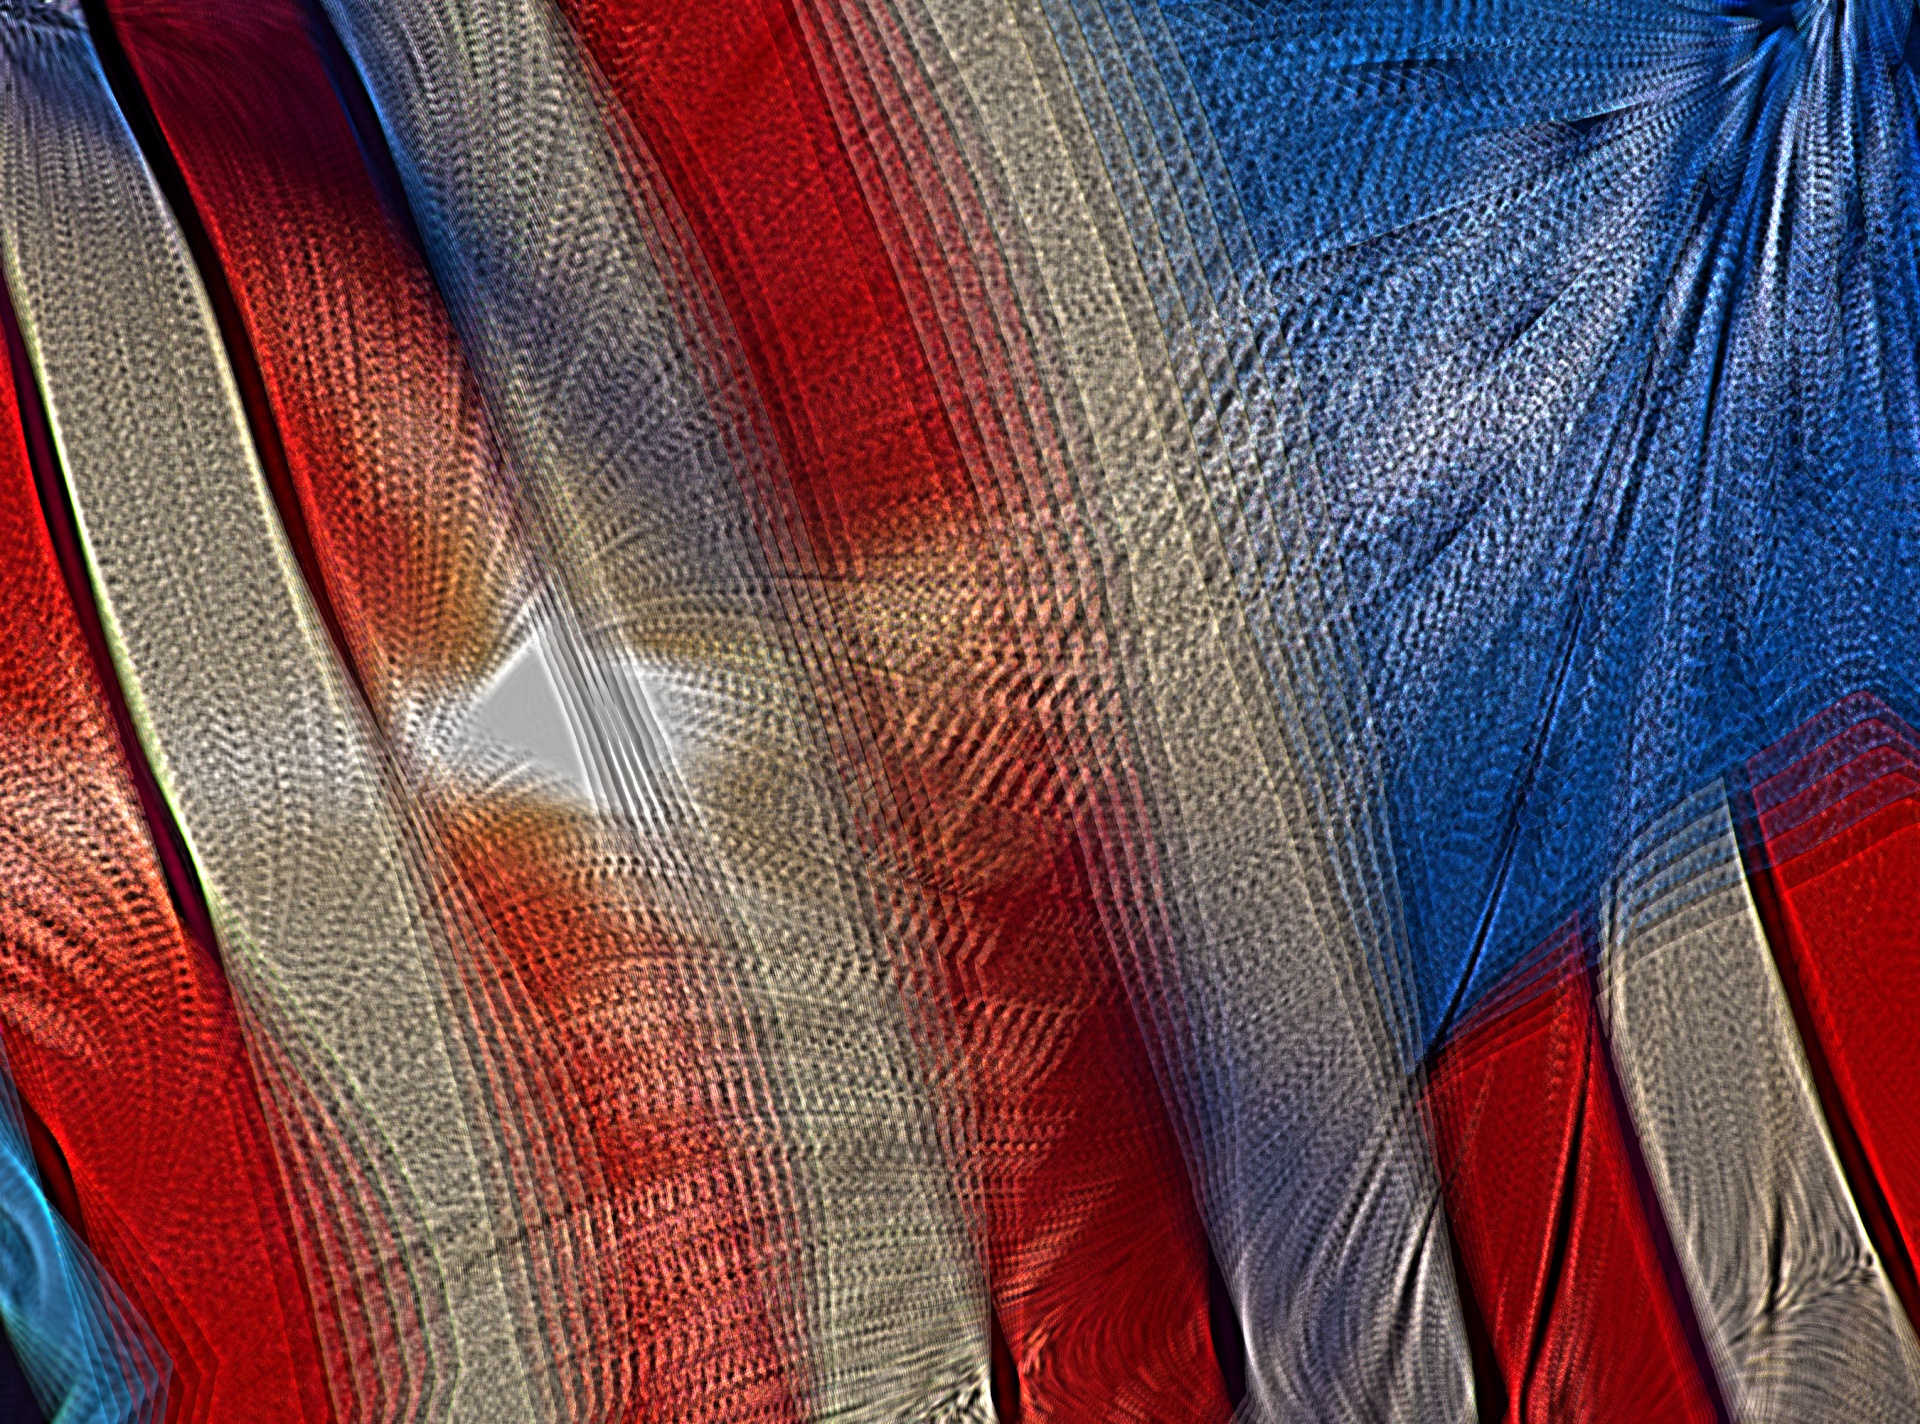 swirling-red-white-and-blue-free-stock-photo-public-domain-pictures